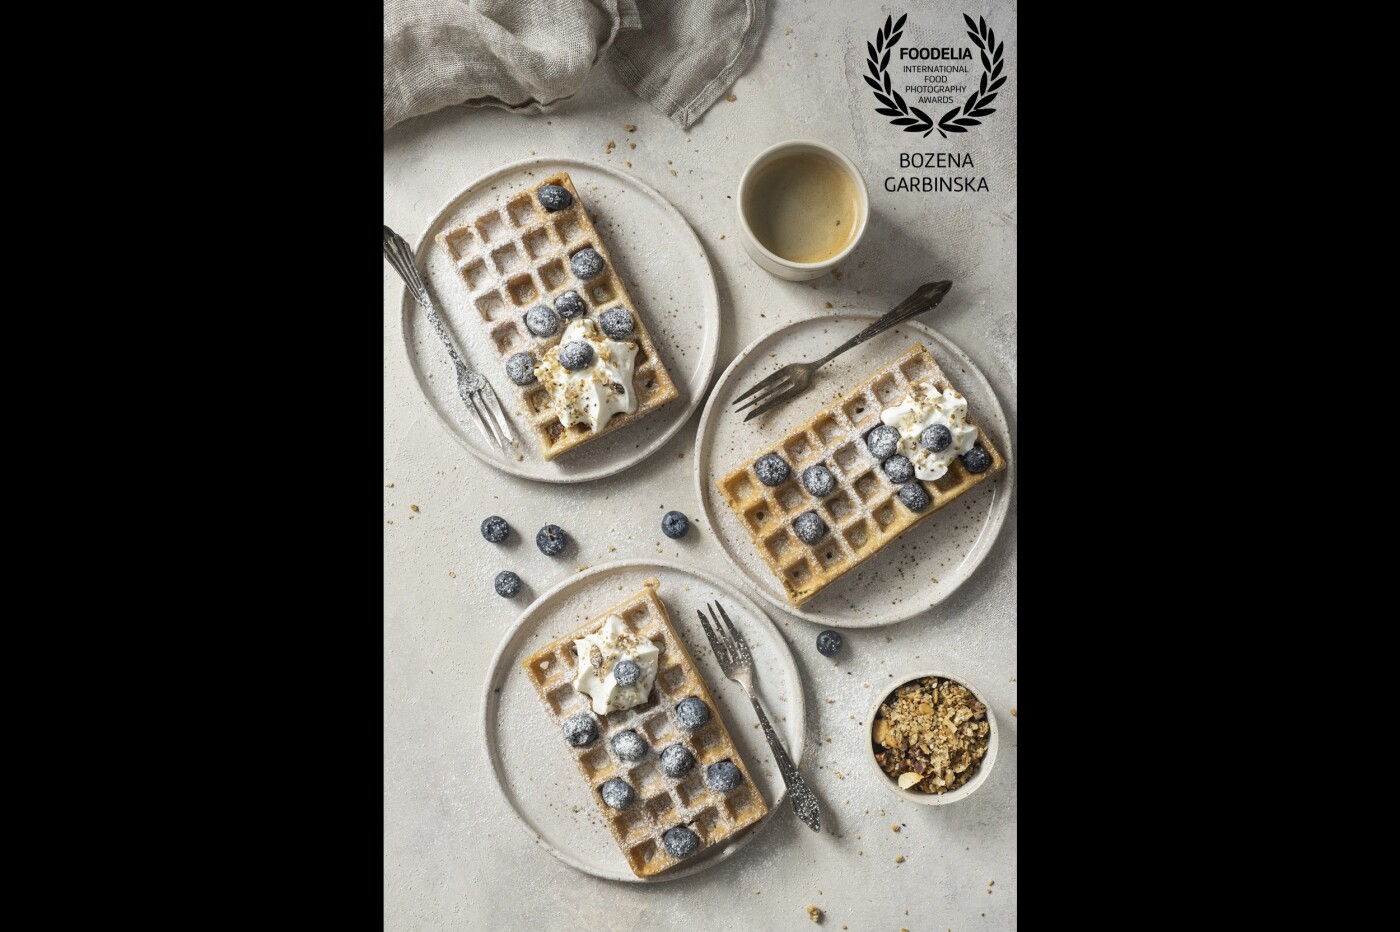 Gluten-free waffles - my first time with this recipe and full success. They tested everyone in my home.<br />
Camera: Fuji X-T3 <br />
Lens: Fujinon 16-55 mm <br />
Settings: ISO 160, 47 mm, f/4.5, 1/50 sec, tripod, daylight